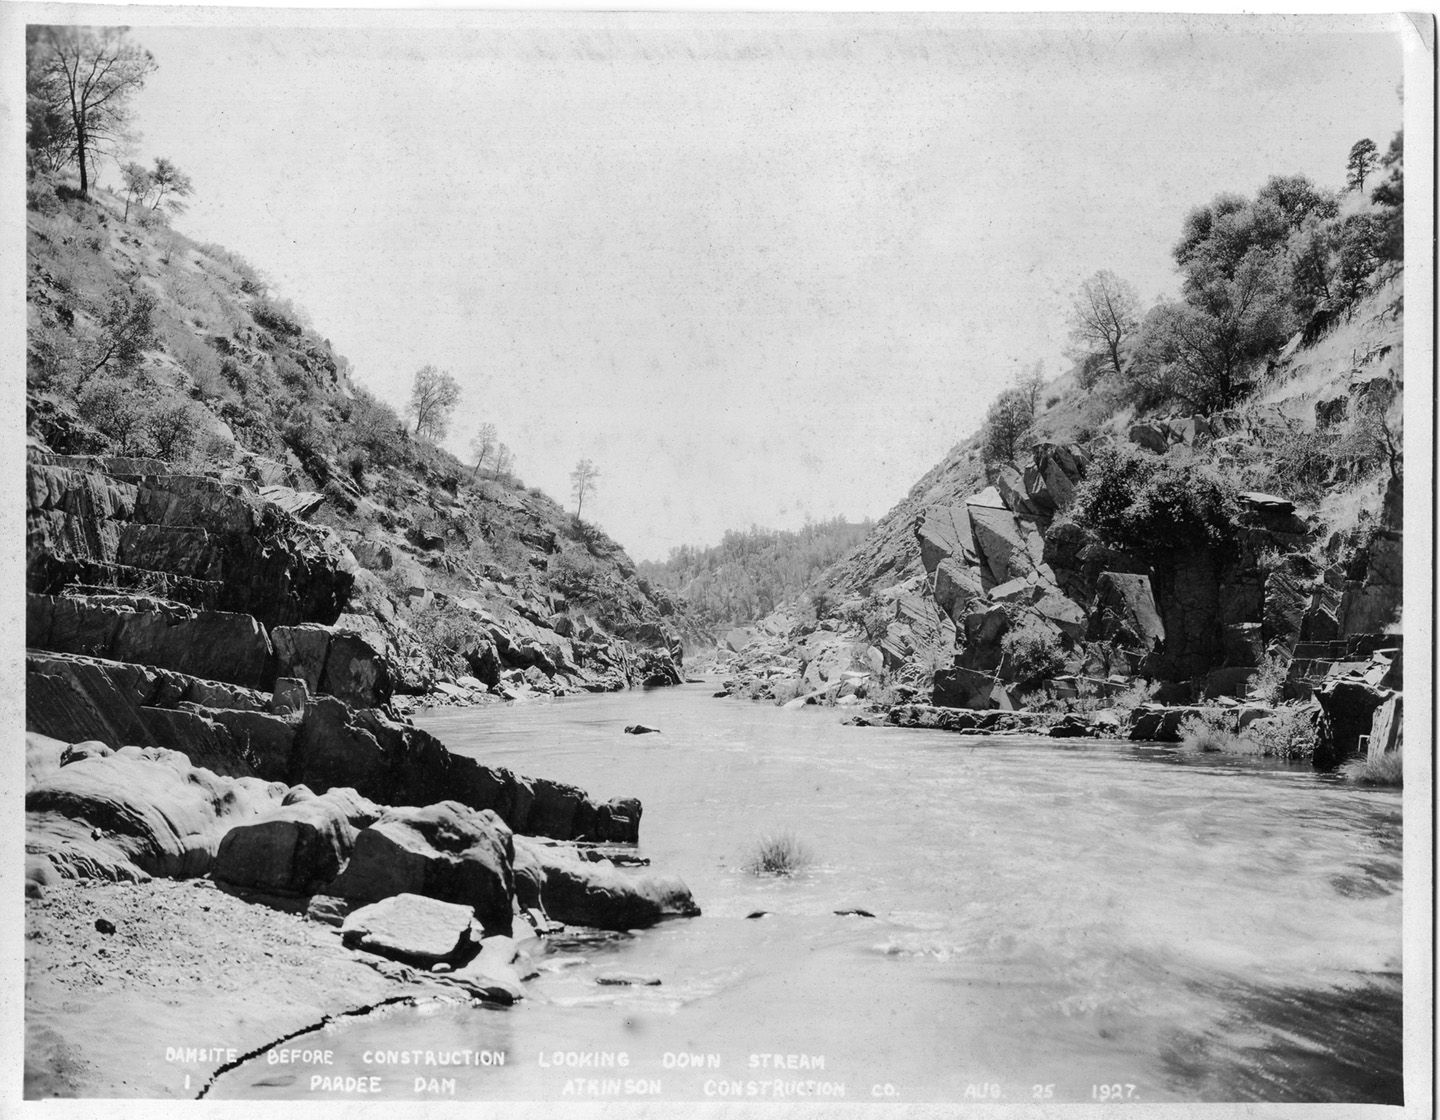 Dam site. Before construction looking down stream (August 1927).